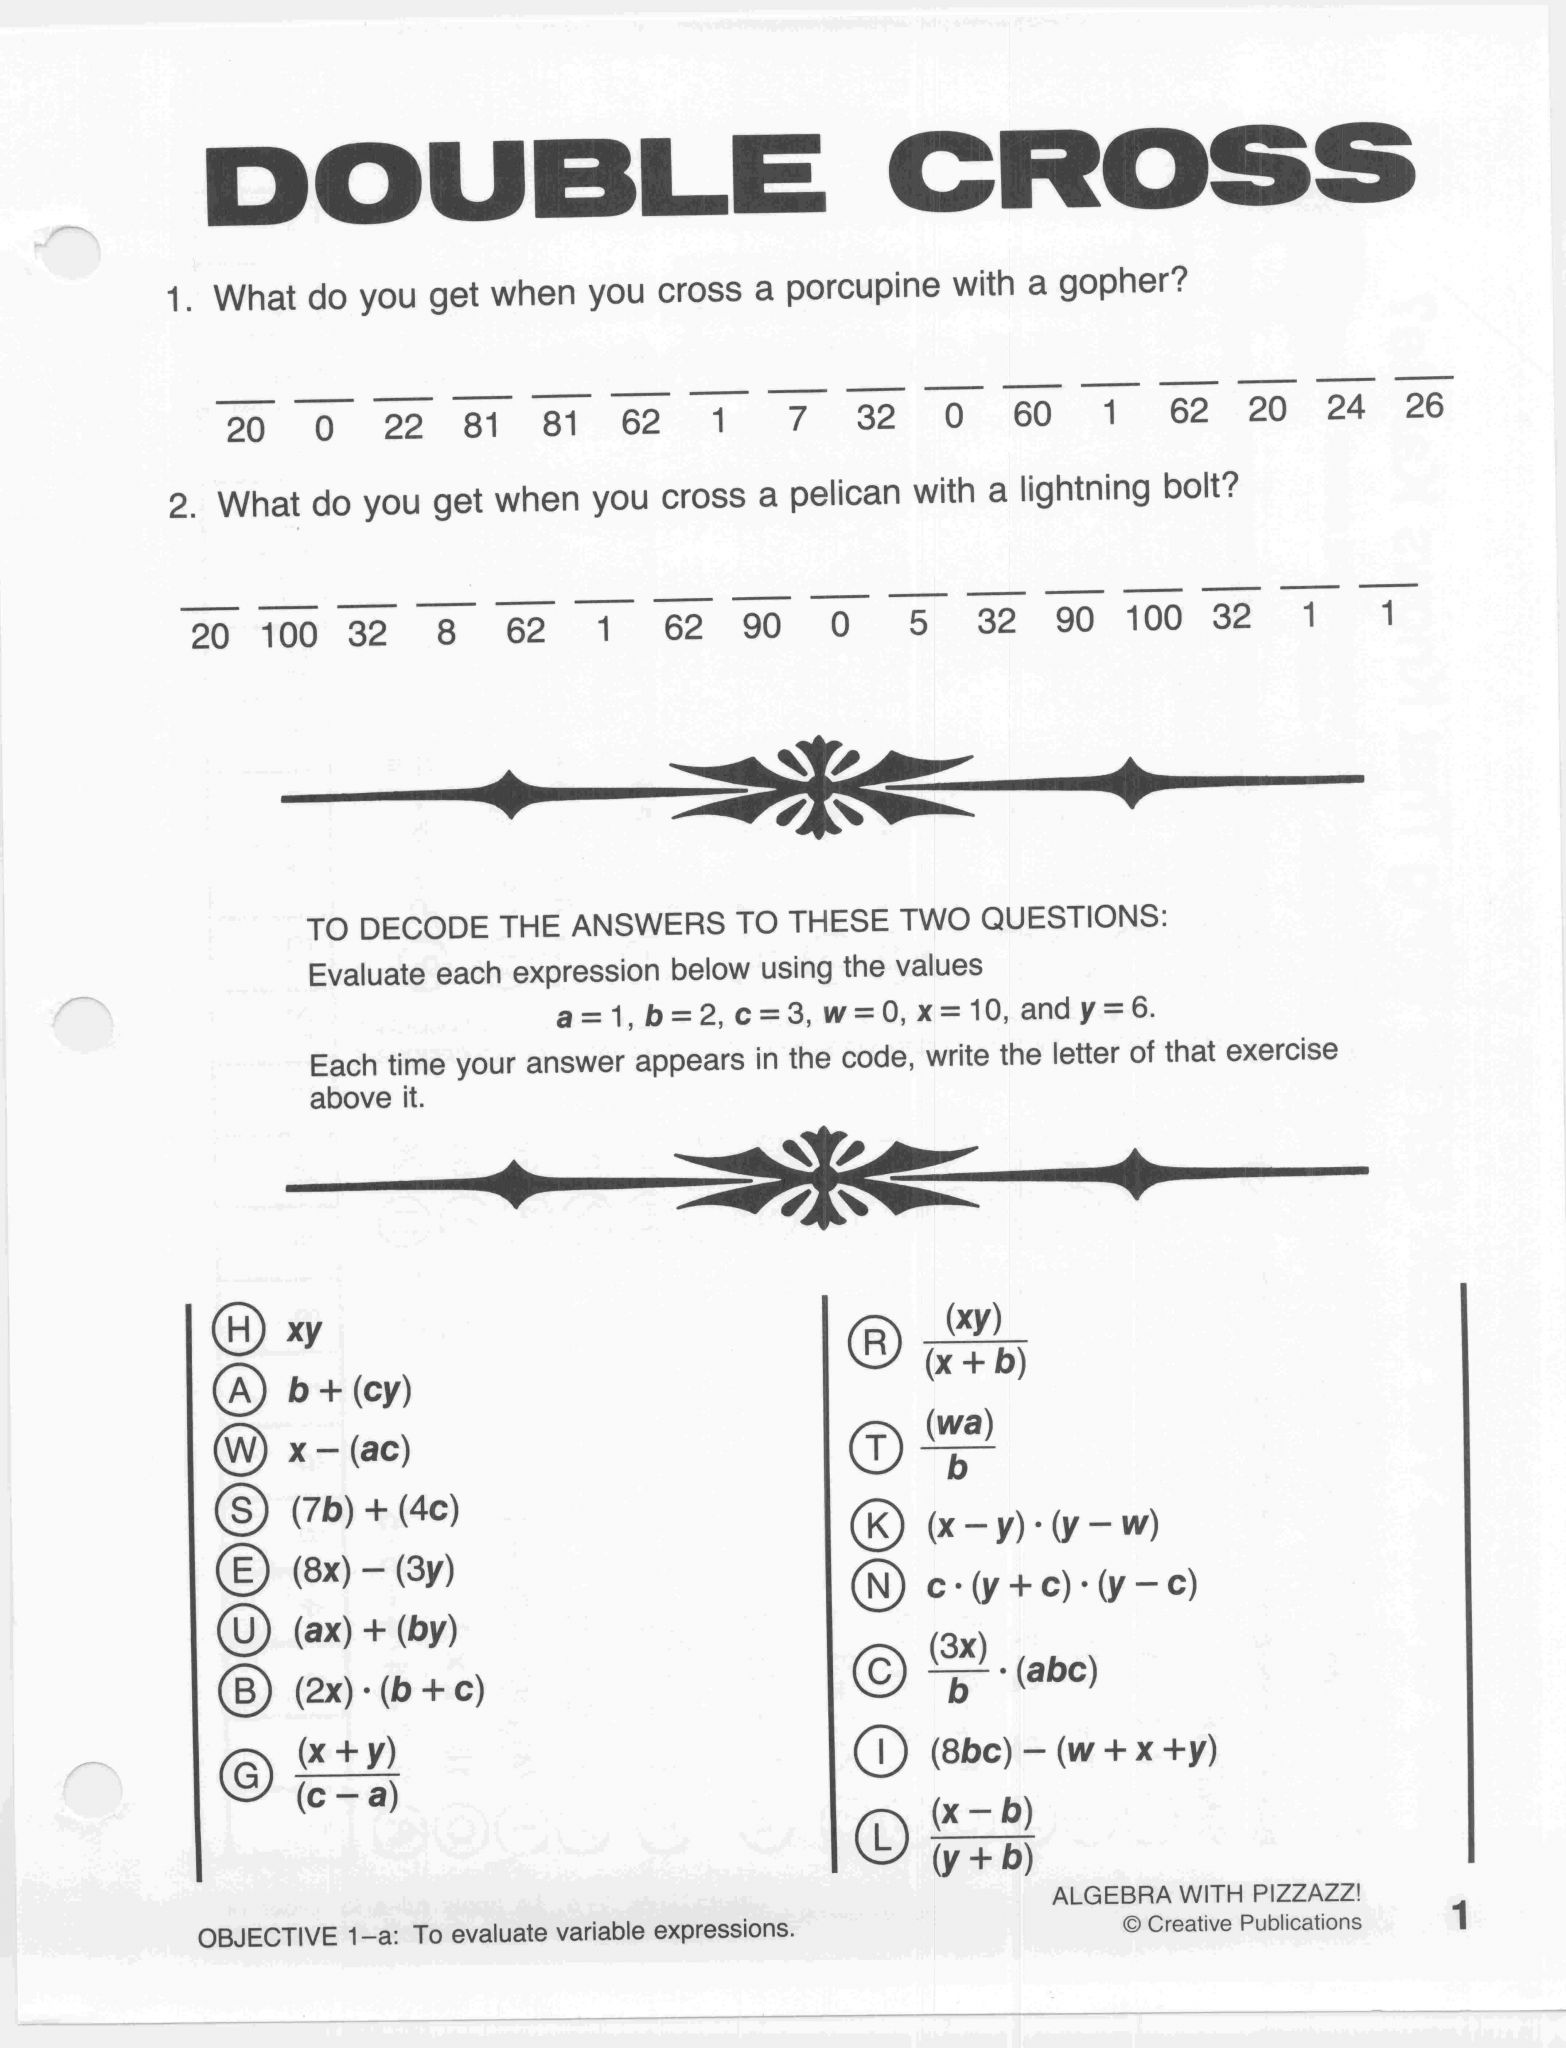 Did You Hear About Math Worksheet Algebra with Pizzazz Answers together with attractive Daffynition Decoder Math Worksheet Answers S